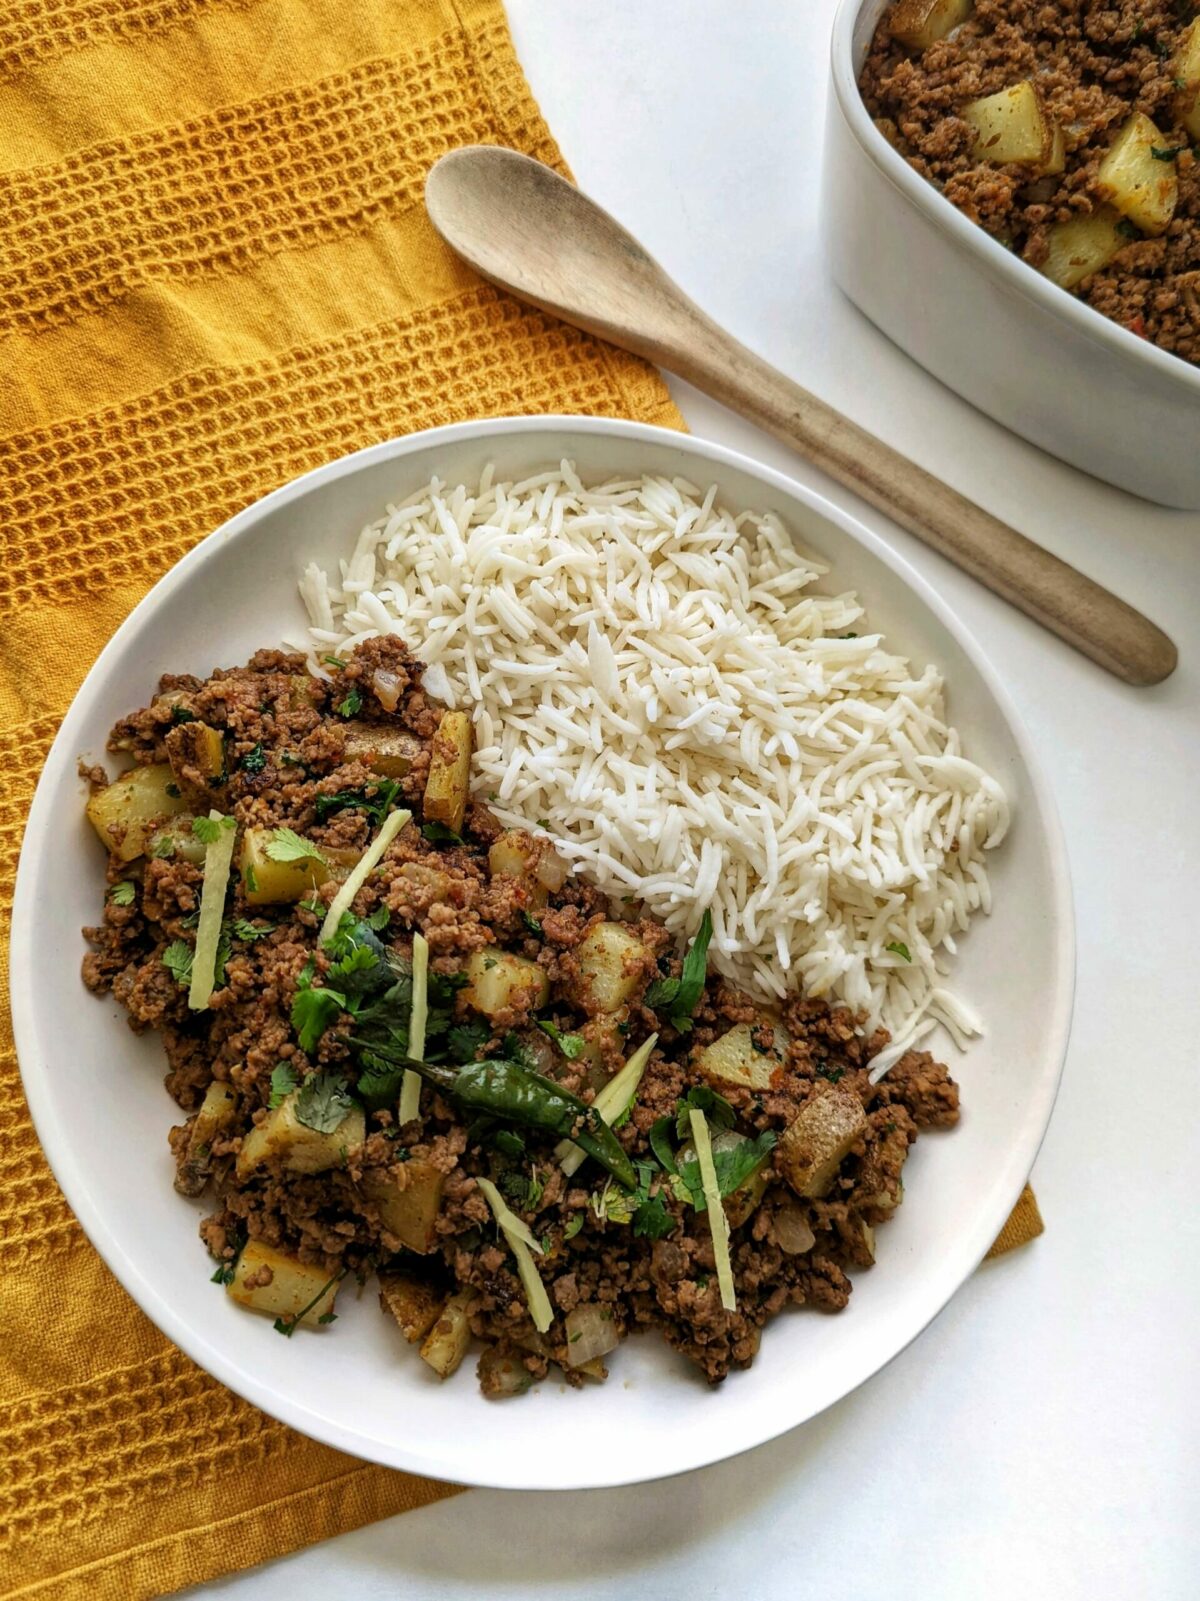 A single serving of aloo keema with basmati rice and garnished with cilantro and ginger.